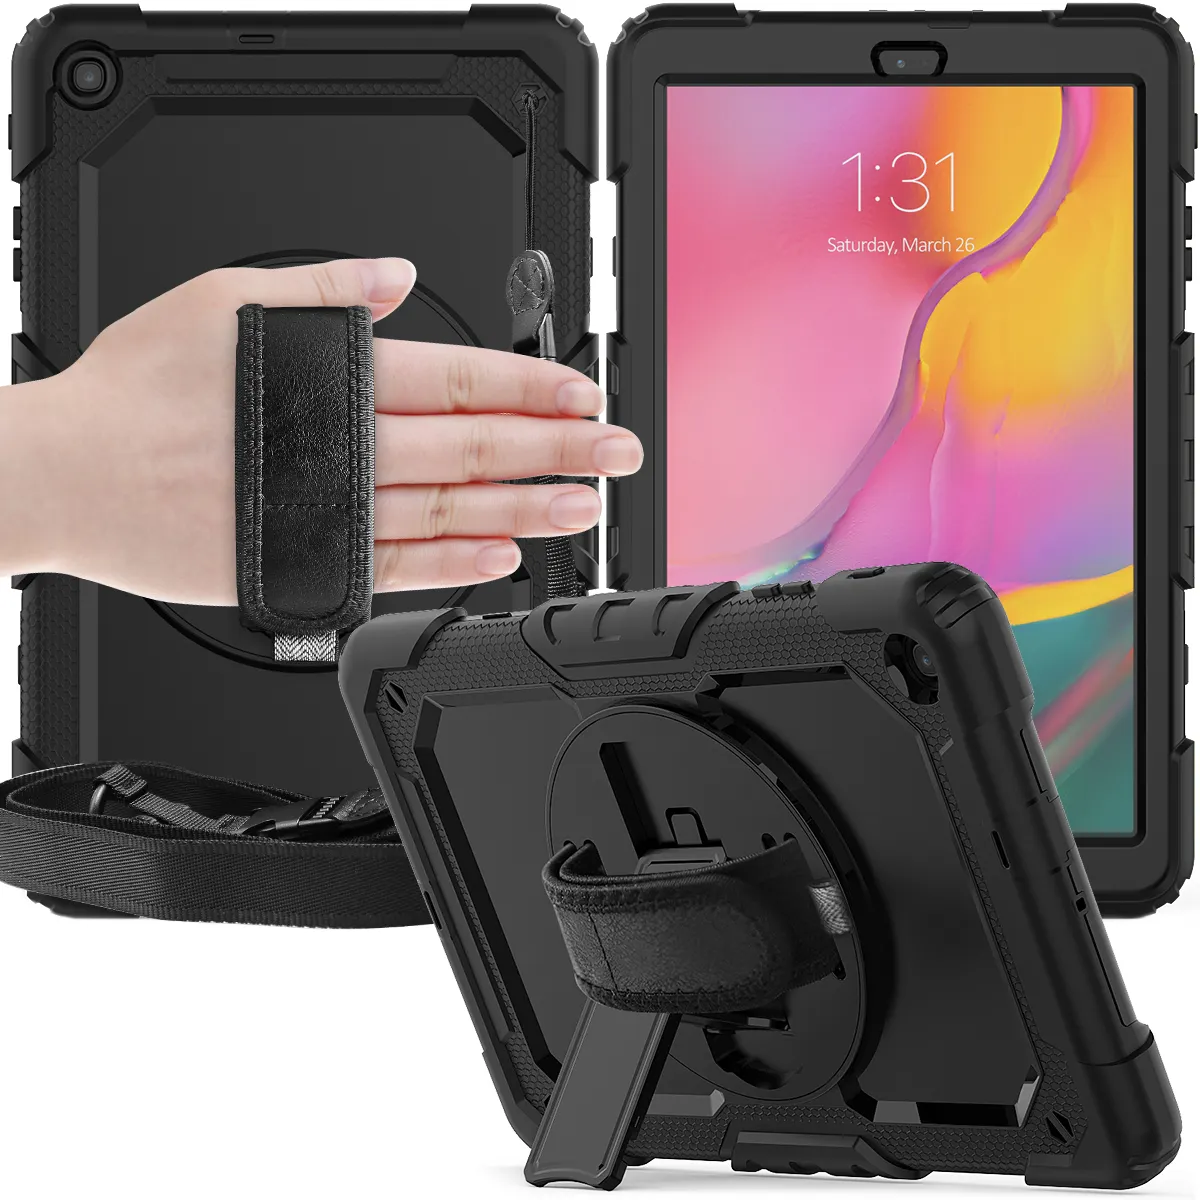 Homtak Soft silicon skin with rotate stand for Samsung Galaxy Tab A 10.1 inch T510/T515 military level case